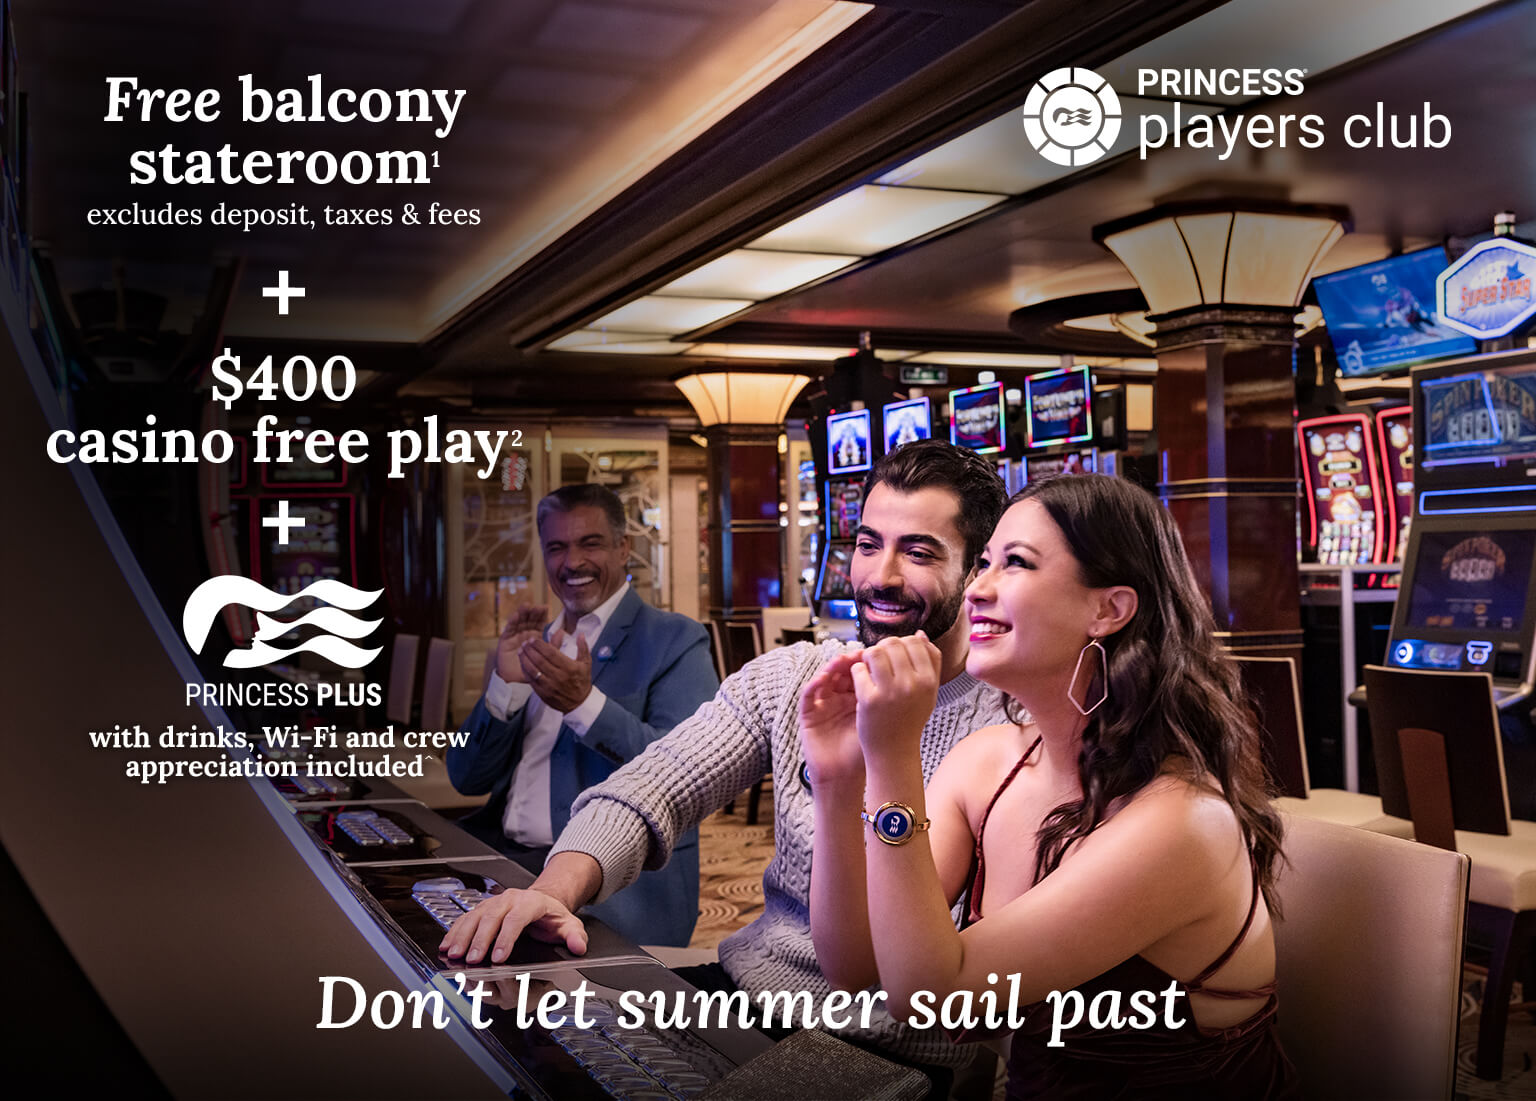 Free balcony stateroom + $400 casino free play + Princess Plus included. Click here to book.